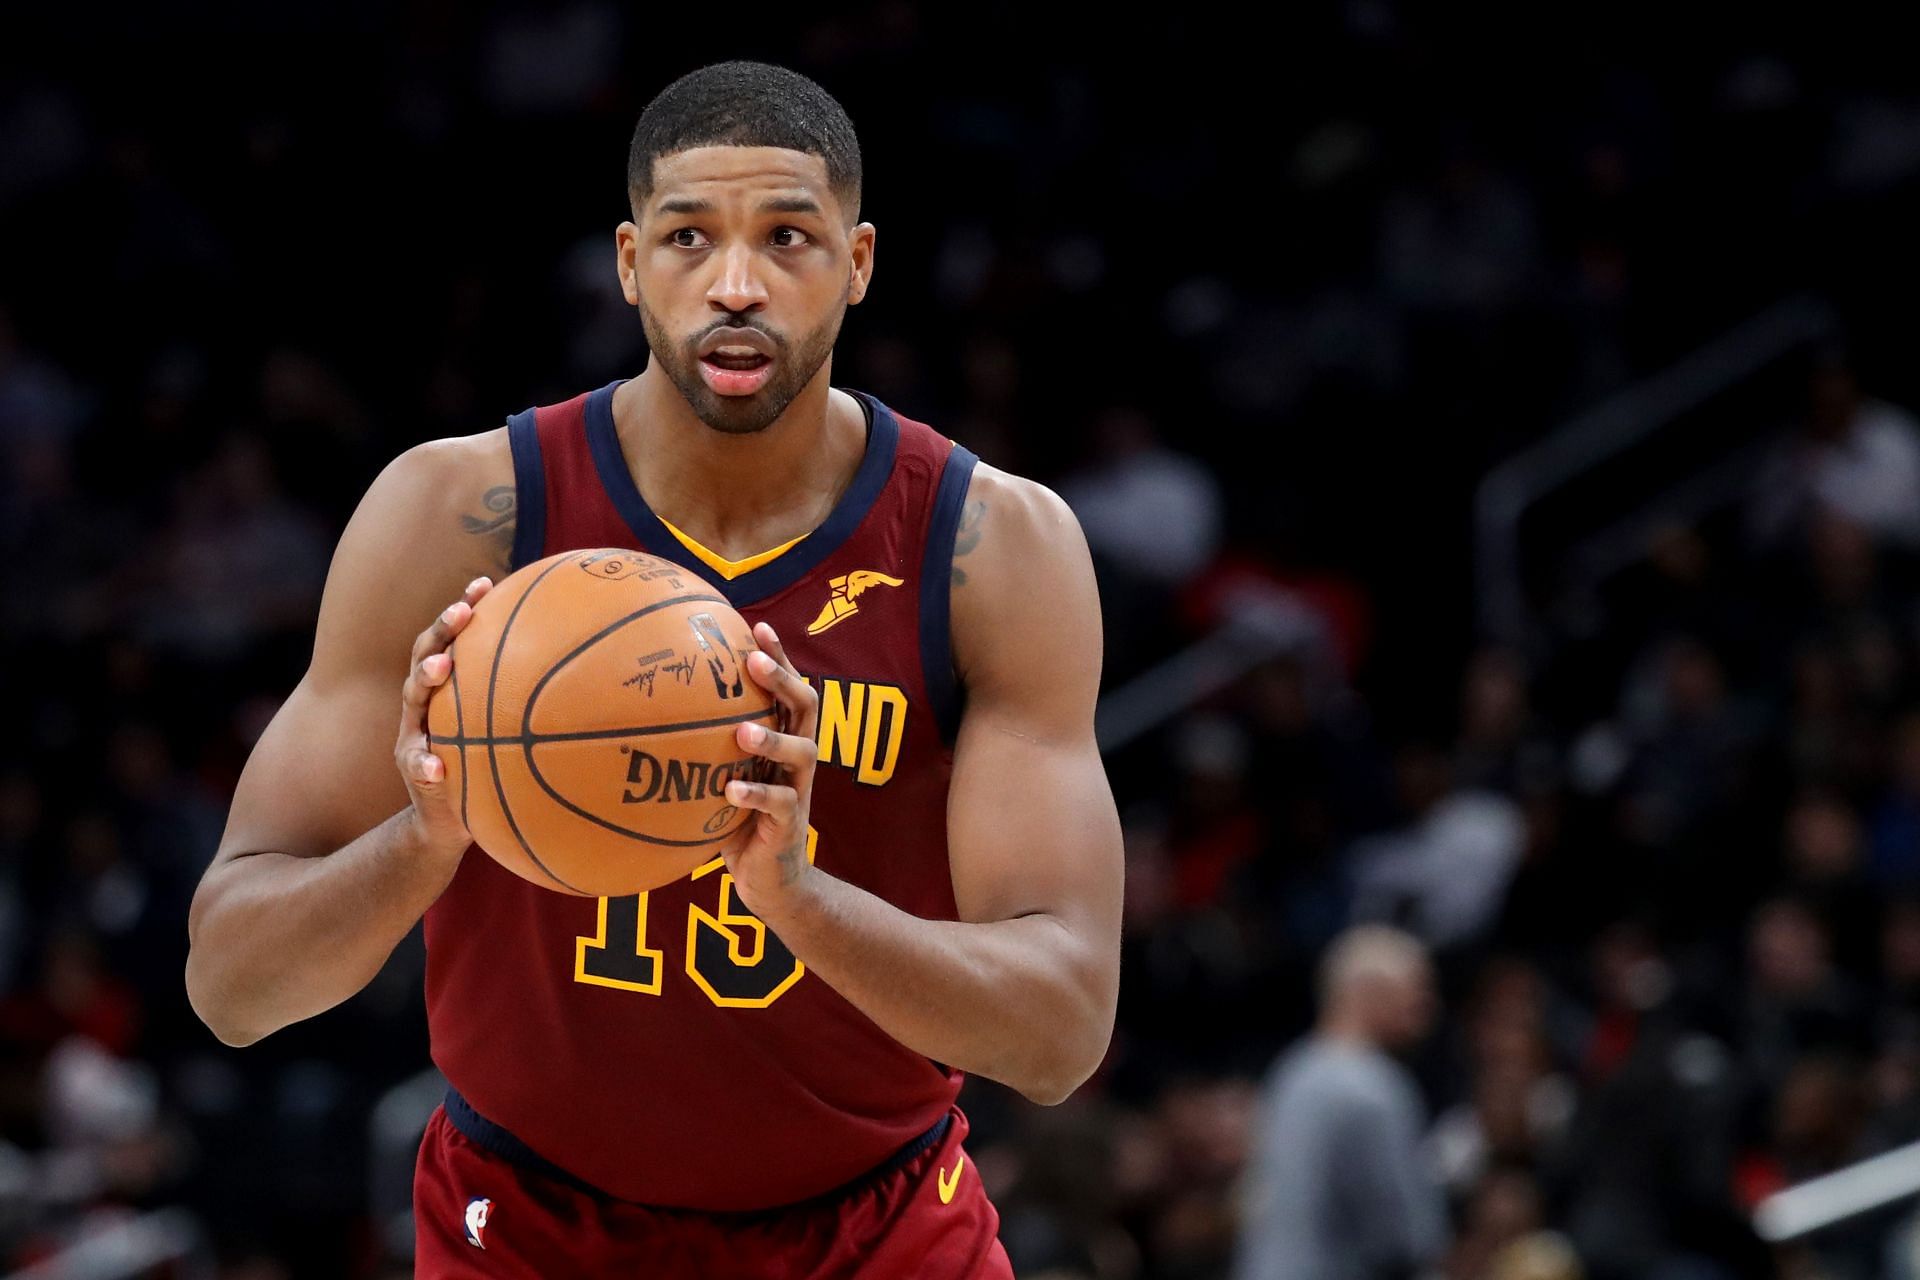 Fans send comical reactions to news of Tristan Thompson having a baby ...